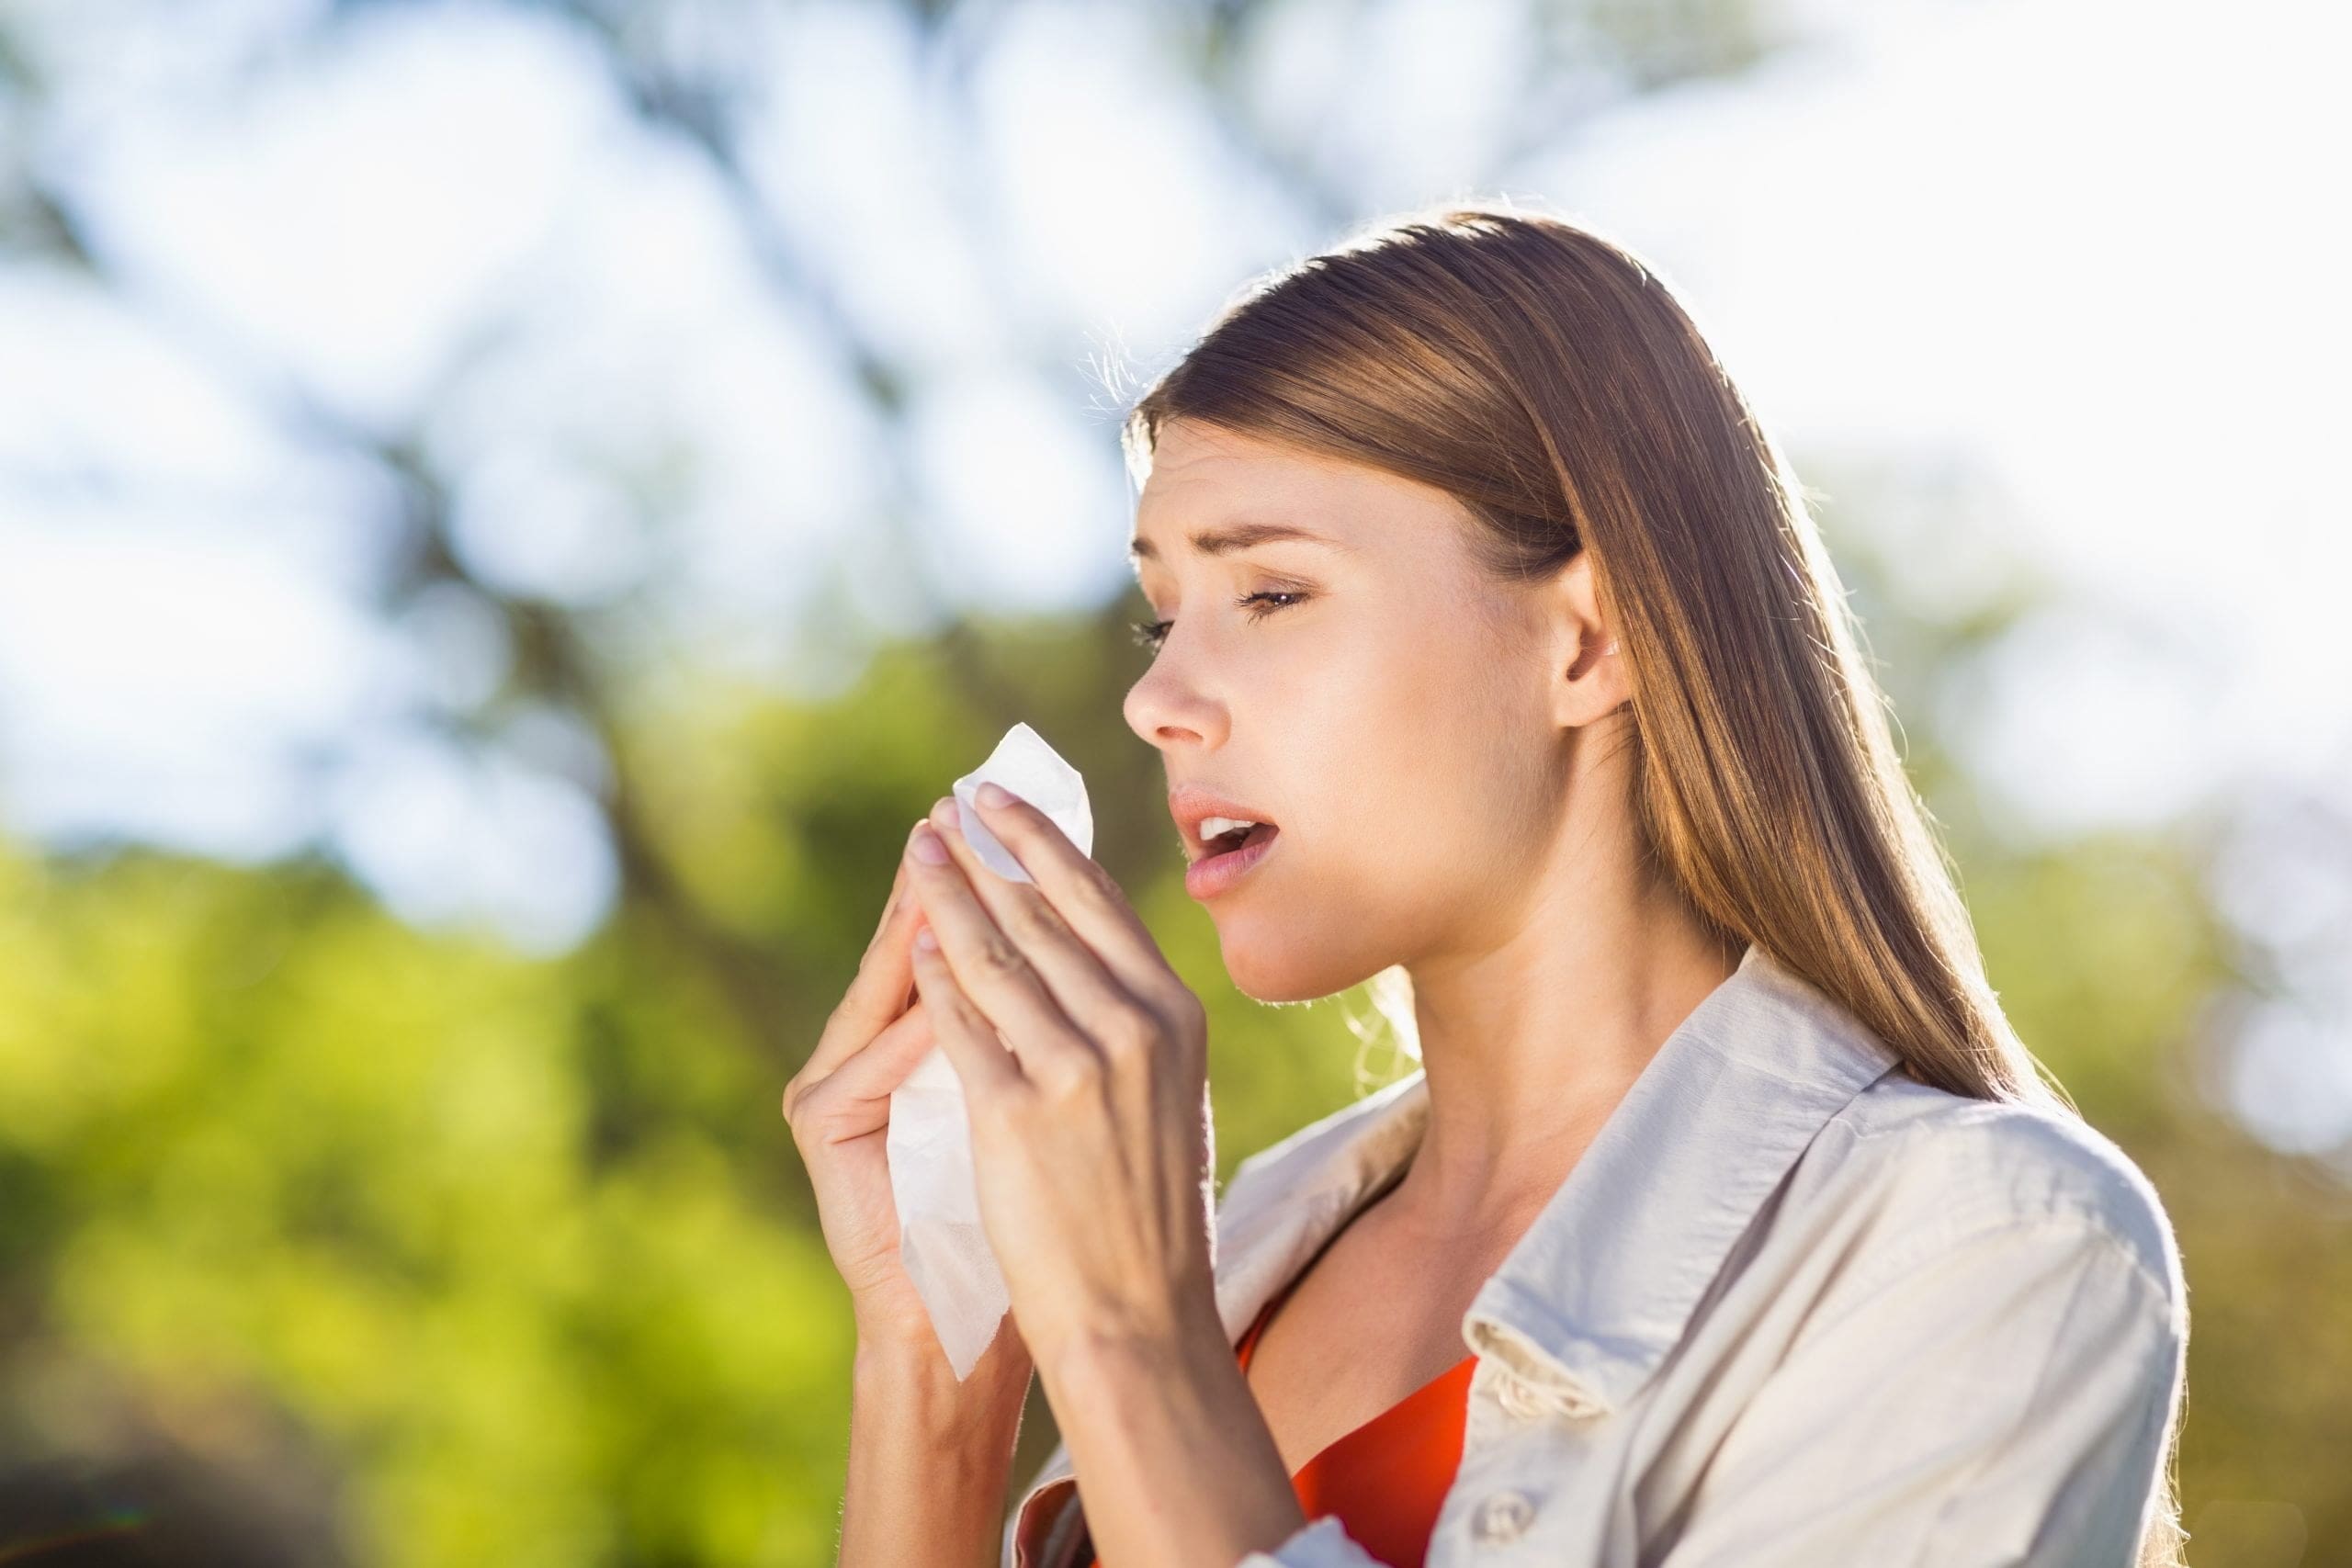 Woman walking outside using tissue to sneeze because of spring allergies